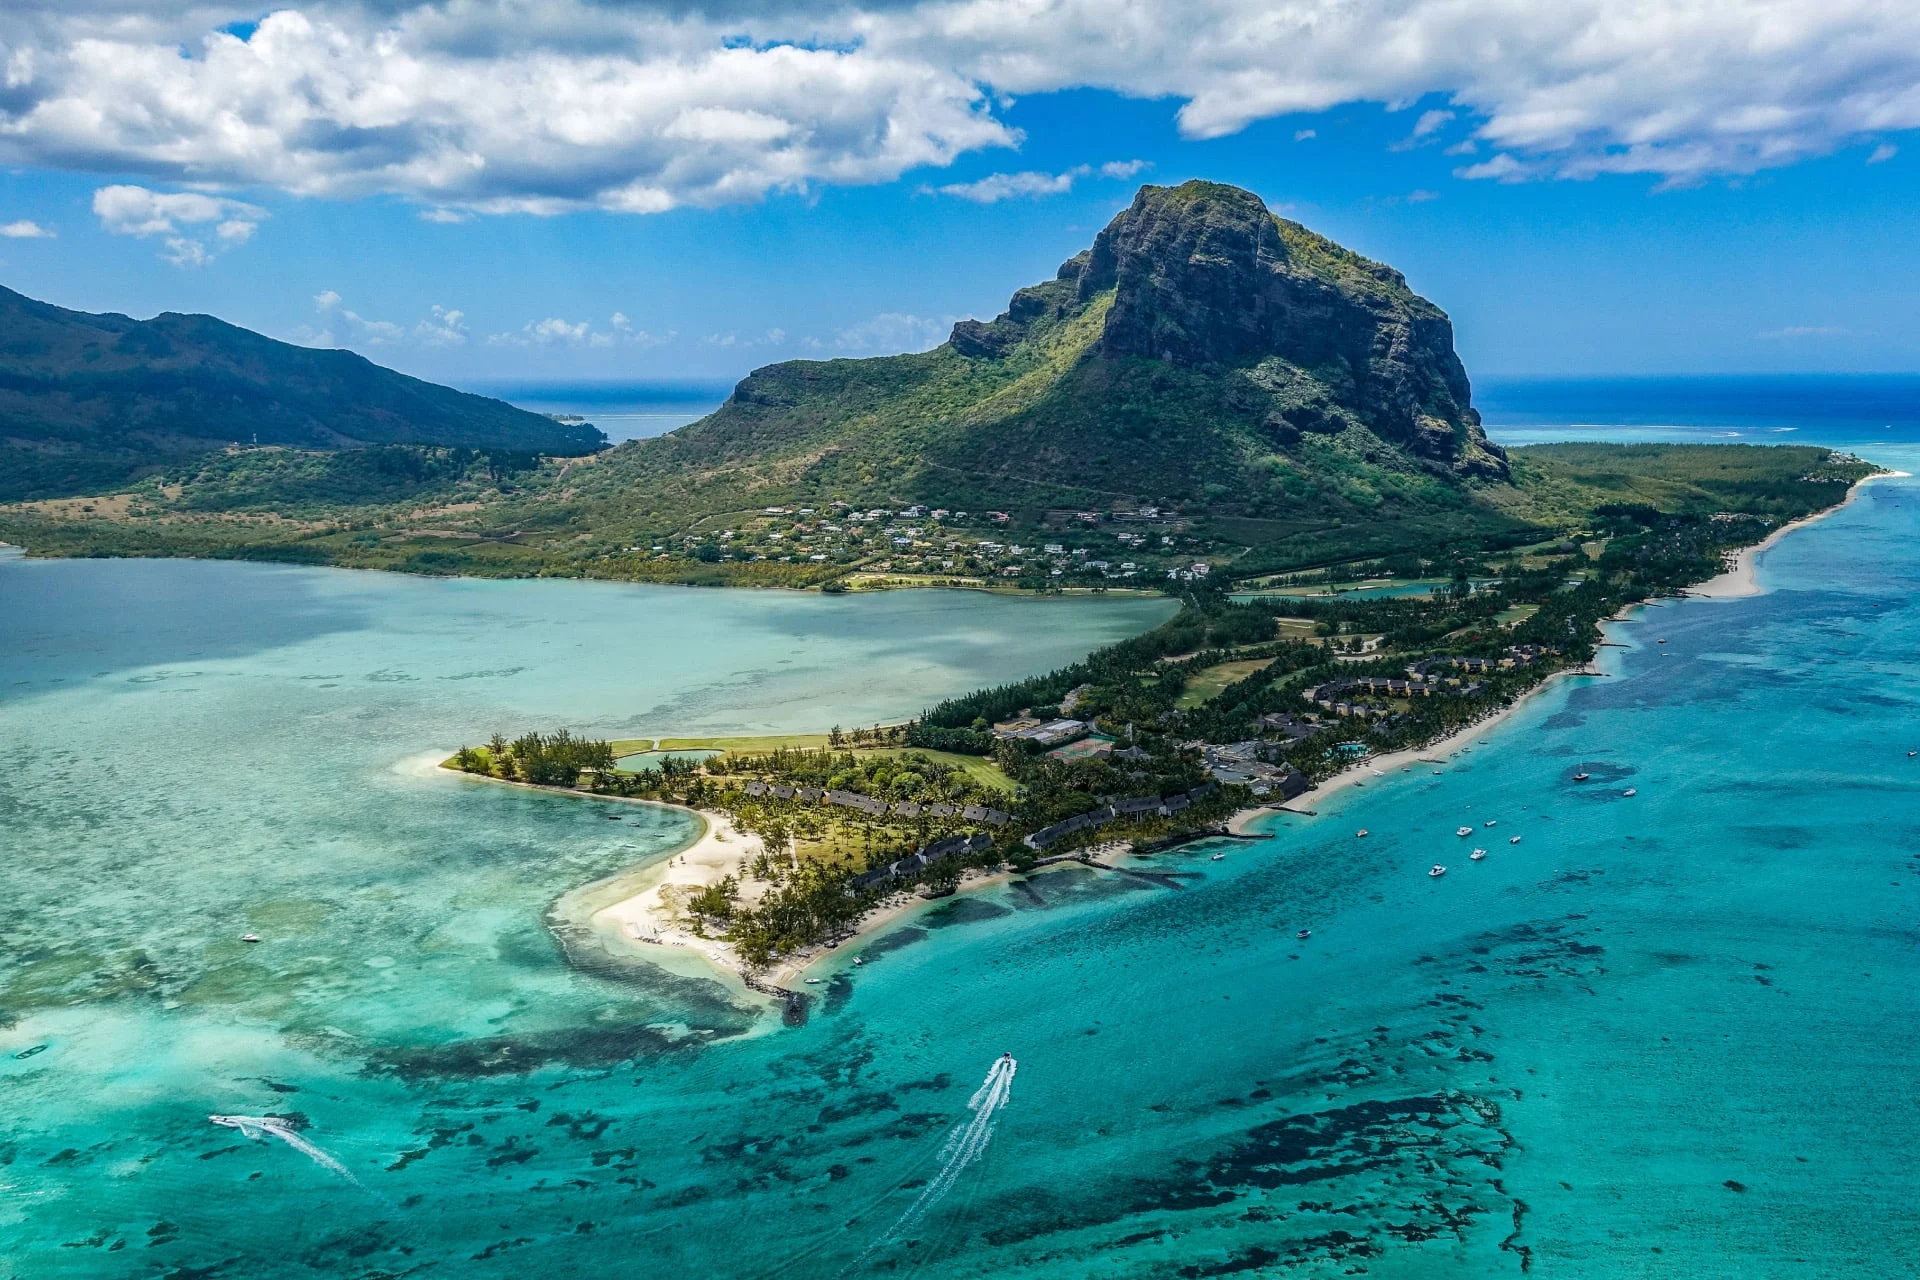 An aerial view of the island of mauritius.